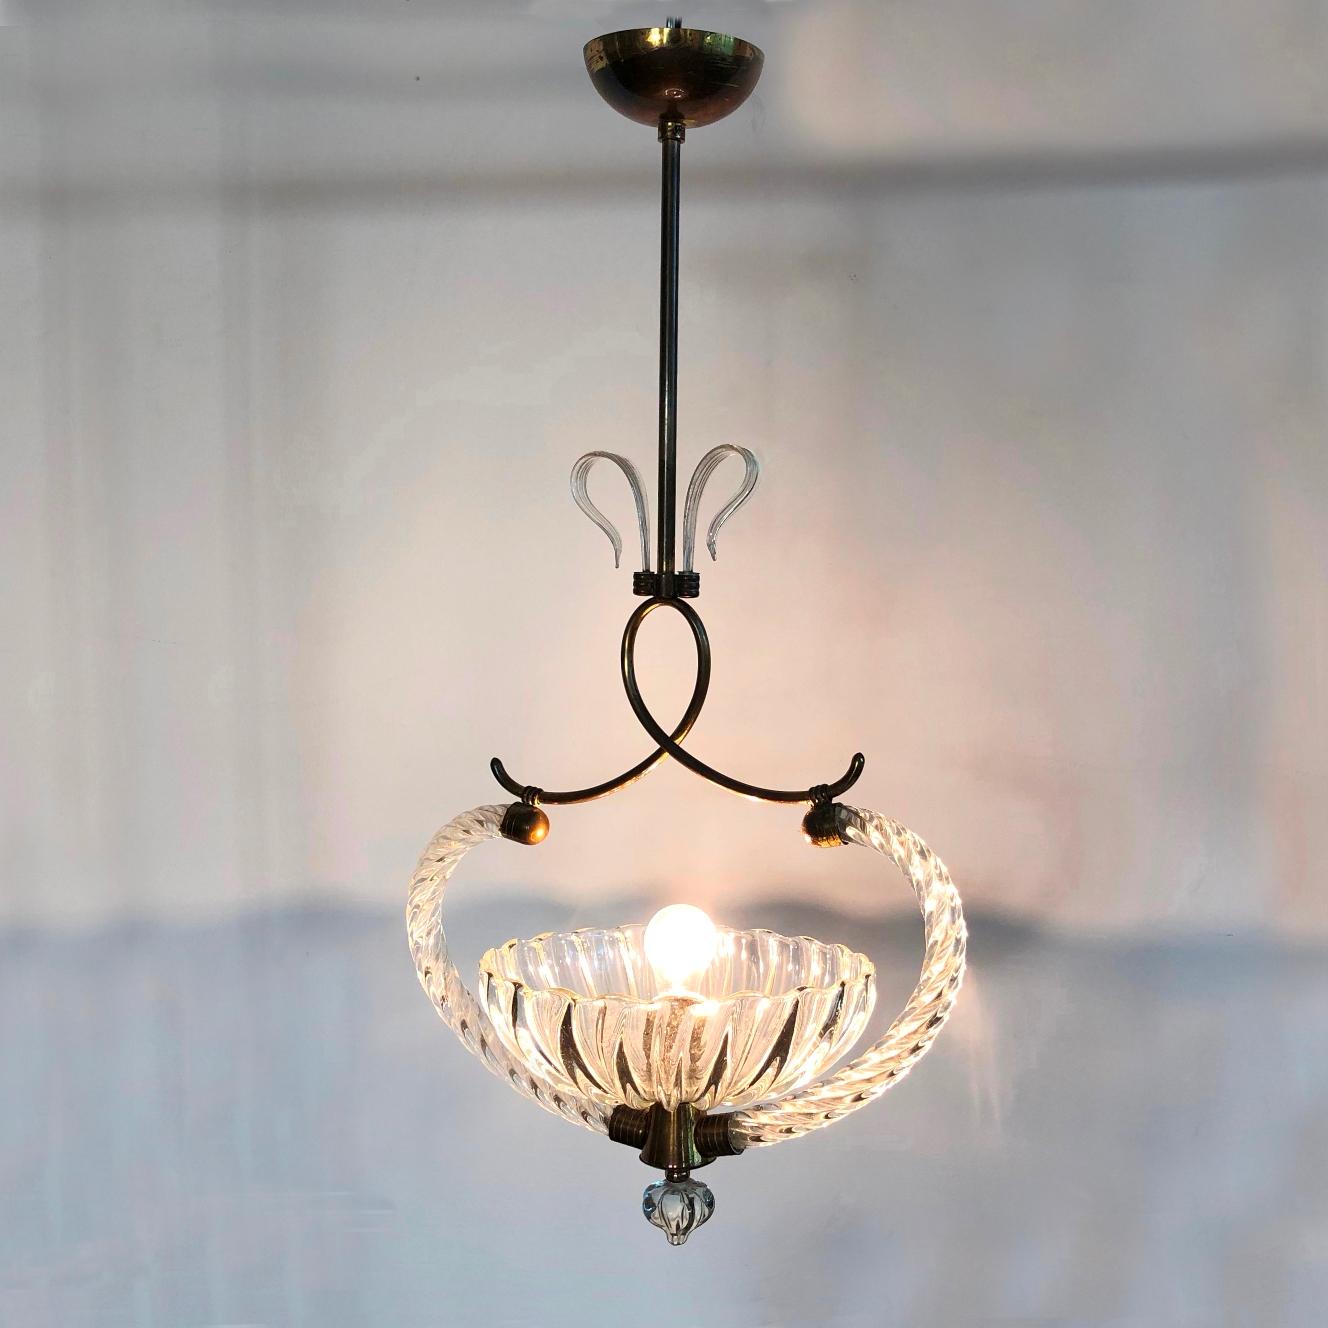 Mid-Century Modern Ercole Barovier Murano Chandelier, Italy, 1940s For Sale